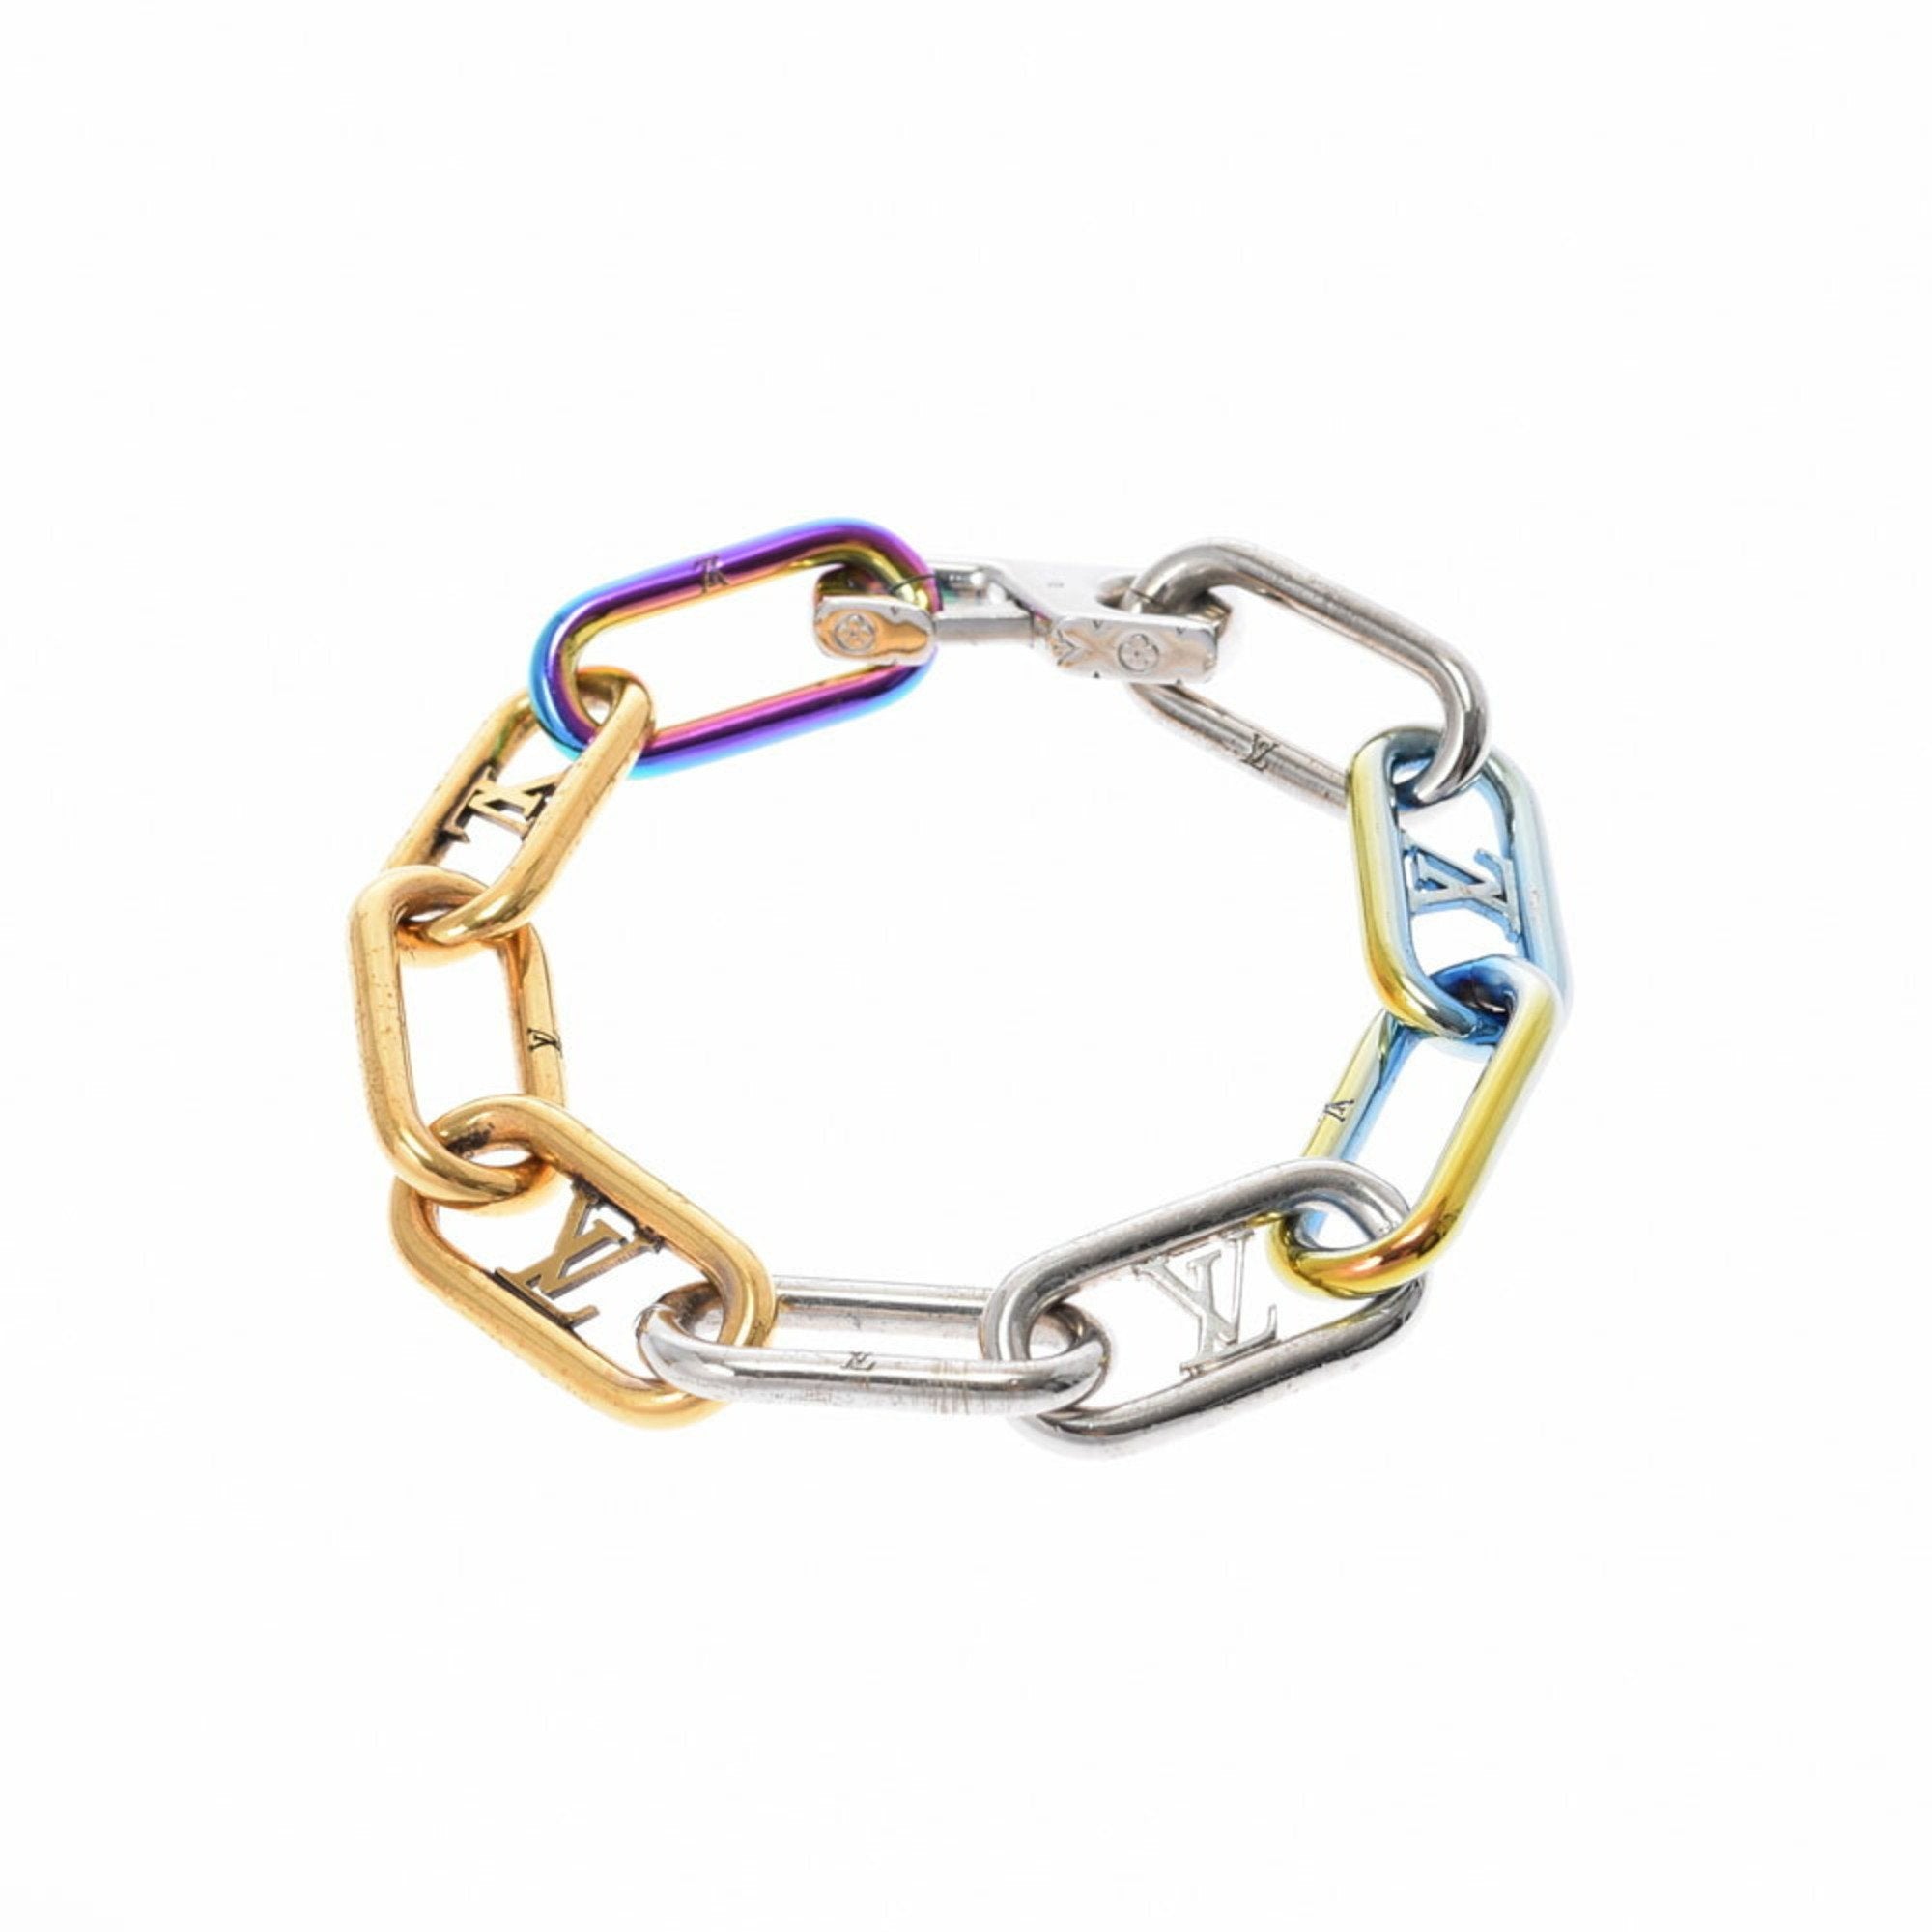 Buy Louis Vuitton LOUISVUITTON Size:- M00508 Brasserie LV Instinct Two Tone  Chain Bracelet from Japan - Buy authentic Plus exclusive items from Japan